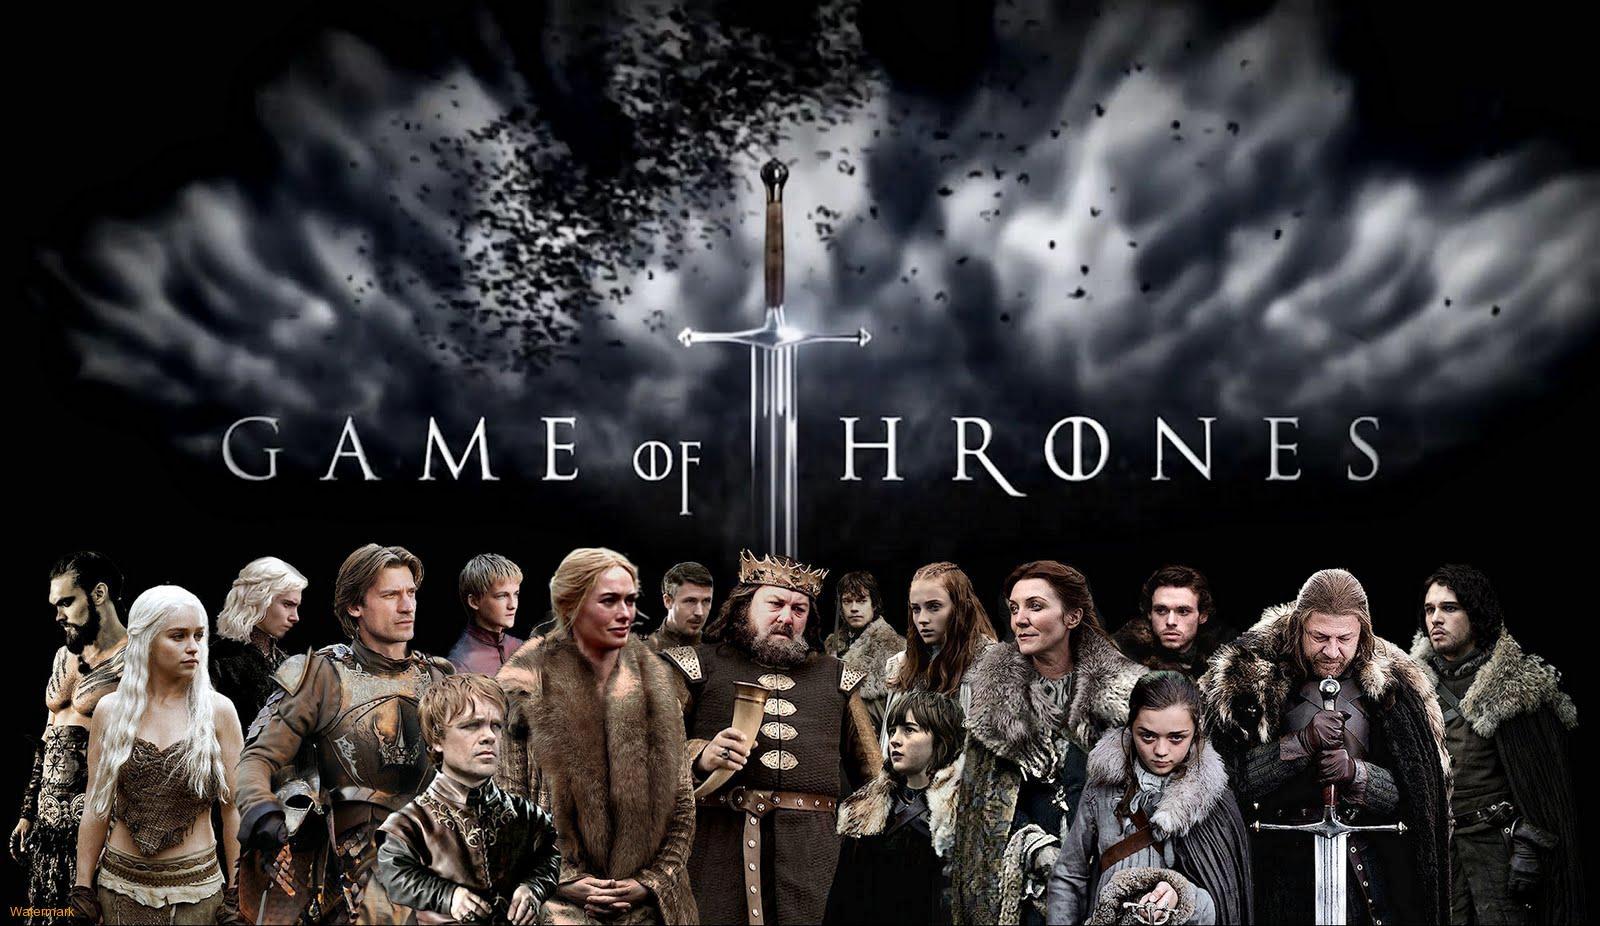 Game of thrones scores 19 emmy nominations